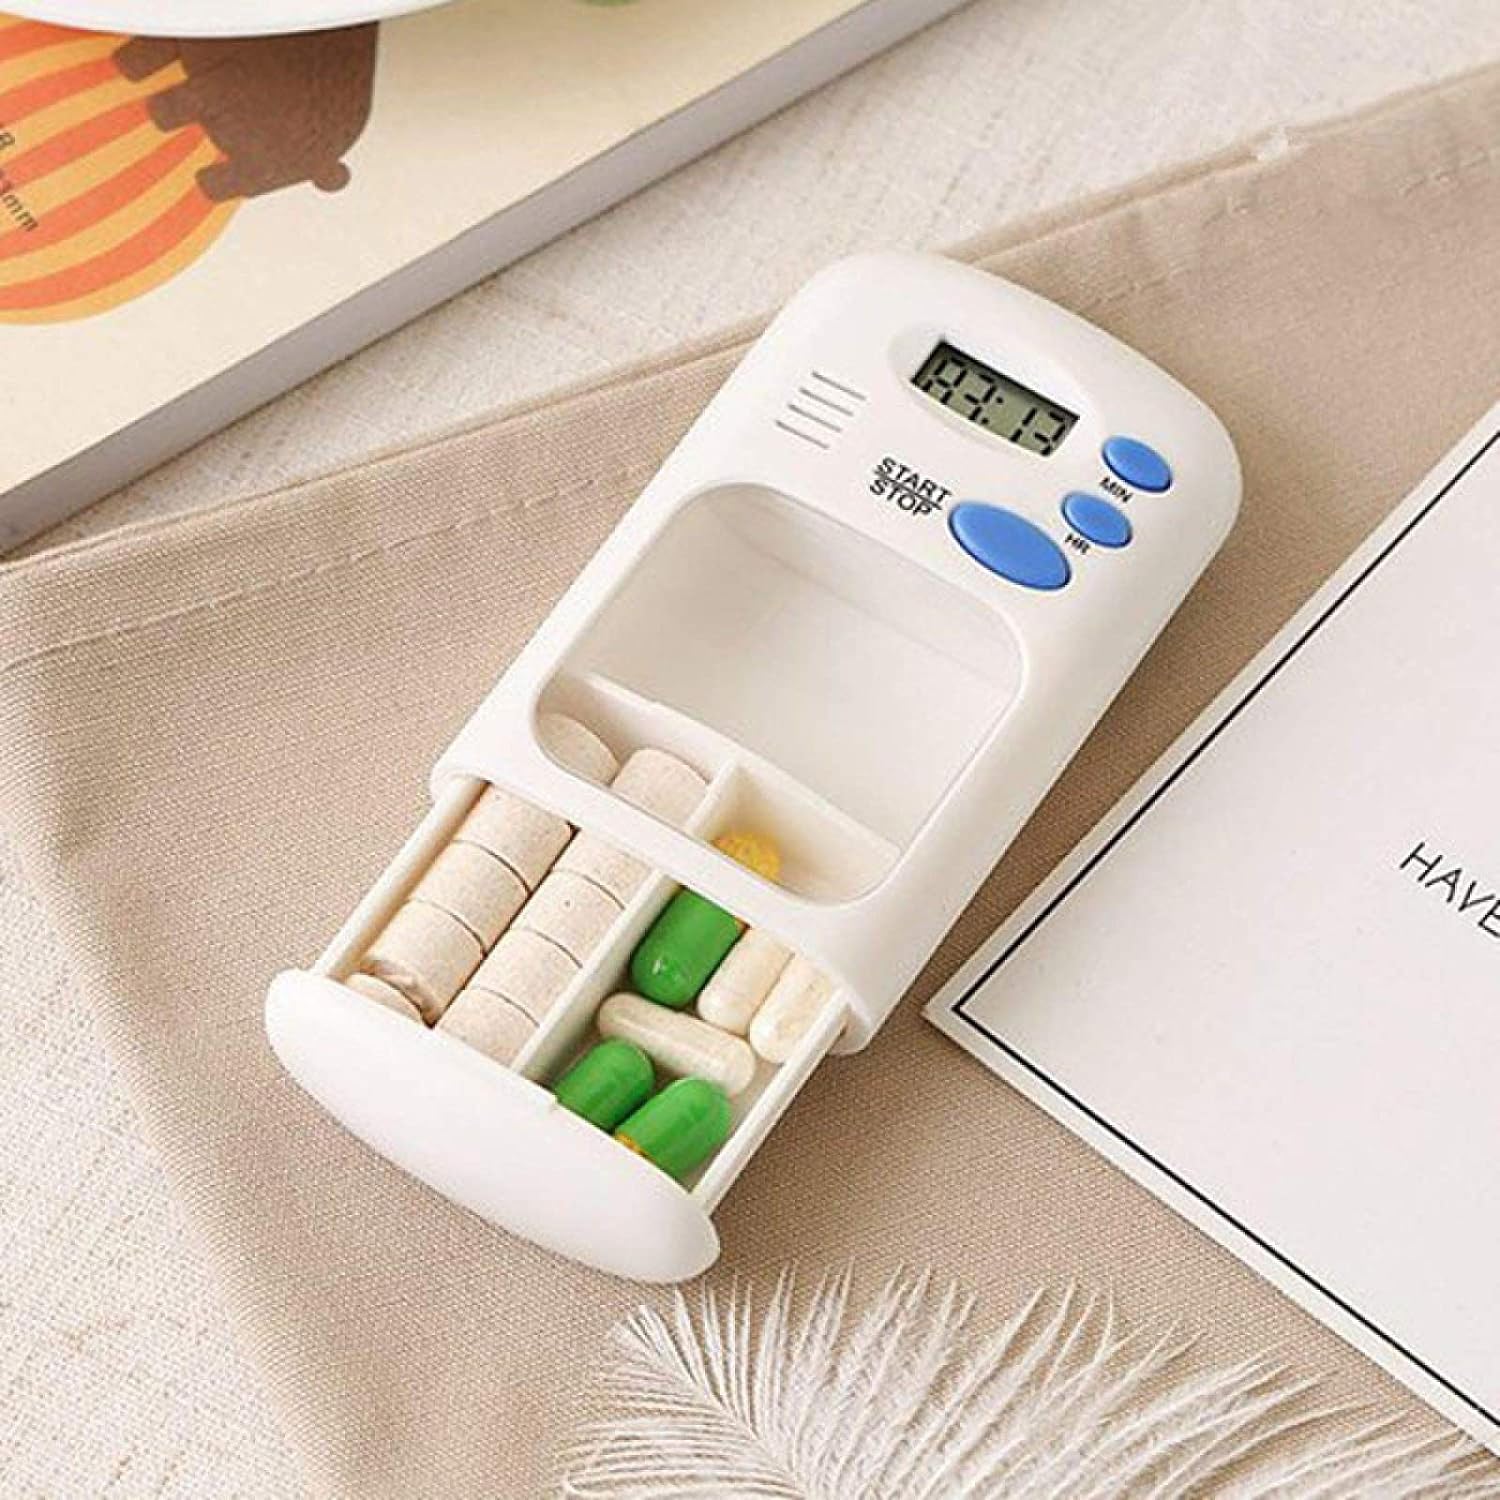 The Portable Mini Travel Carry Pill Box is placed on the table